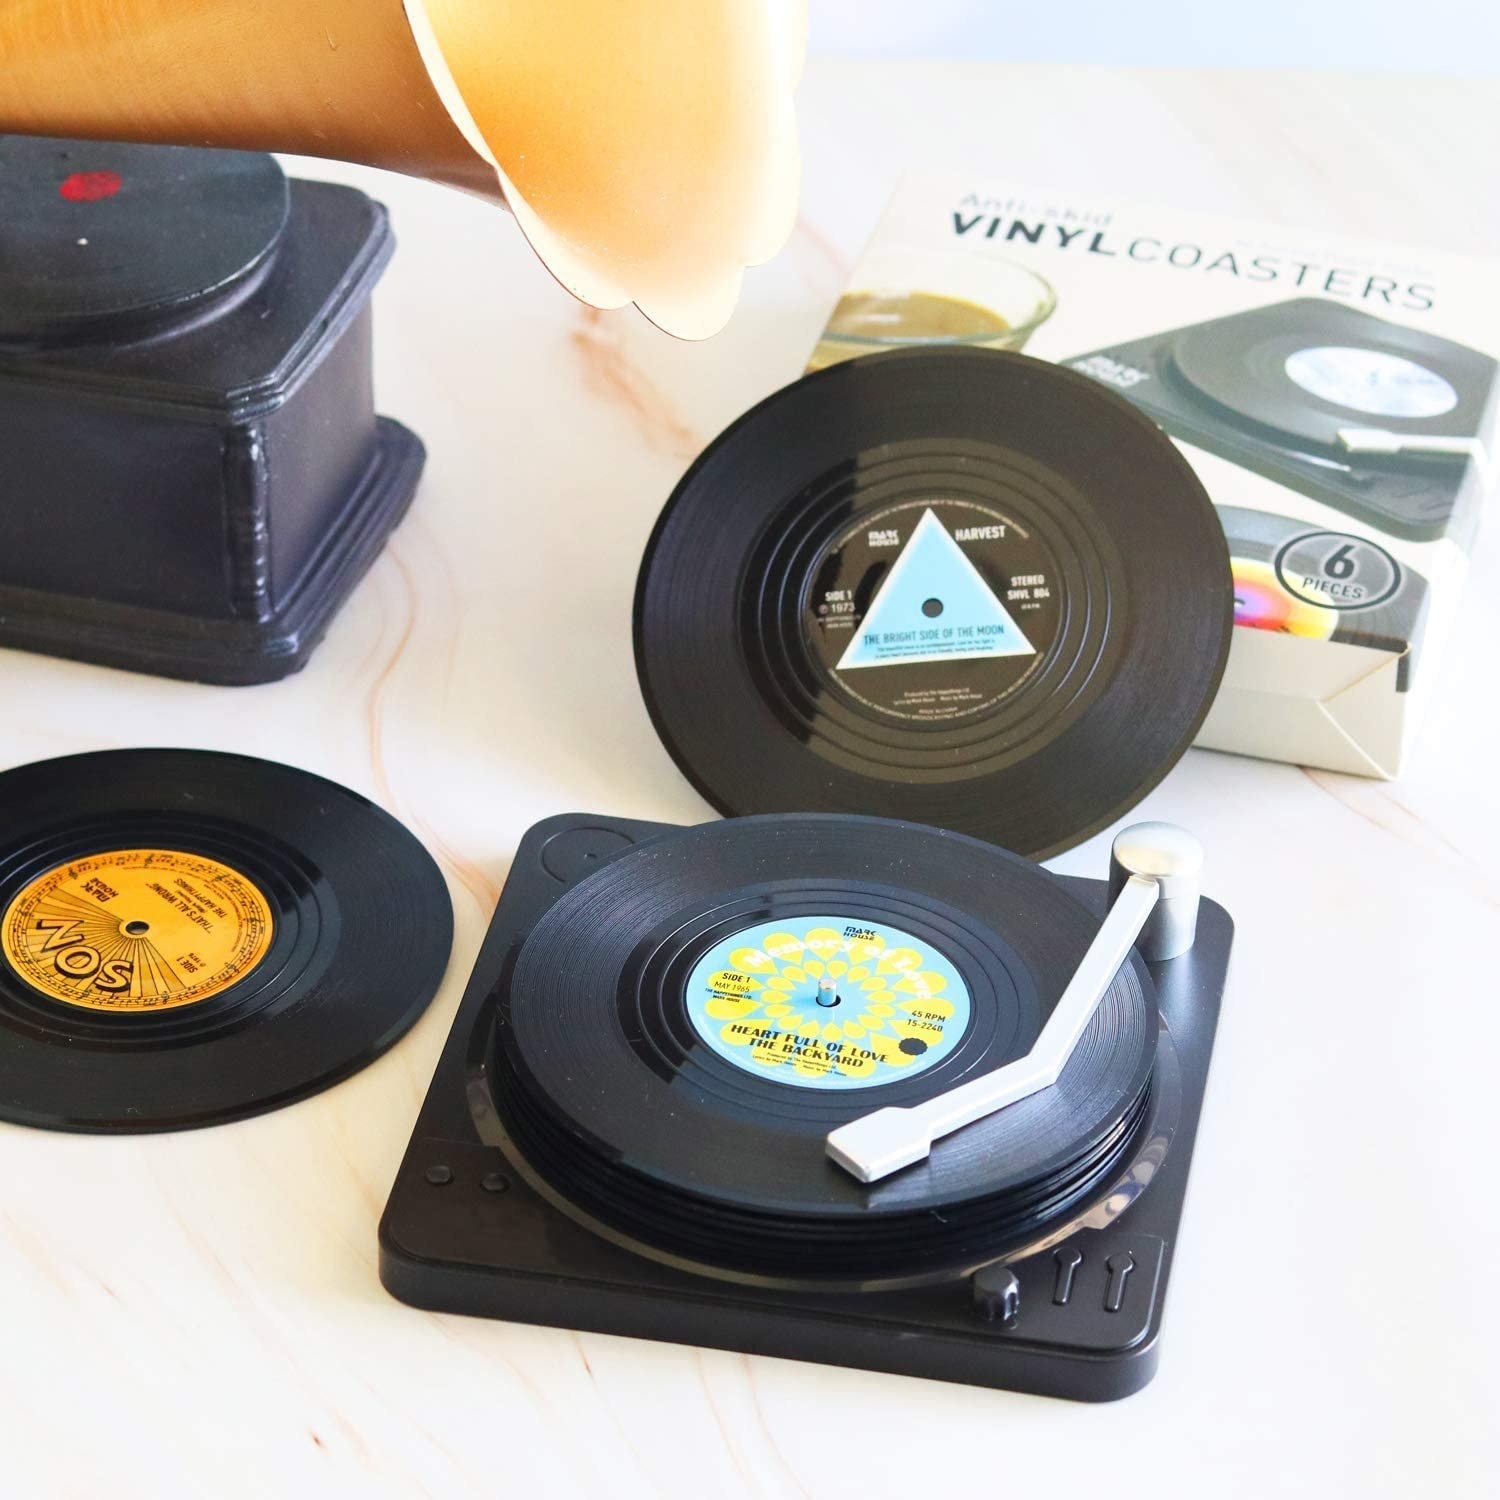 the record shaped coasters on the record player case